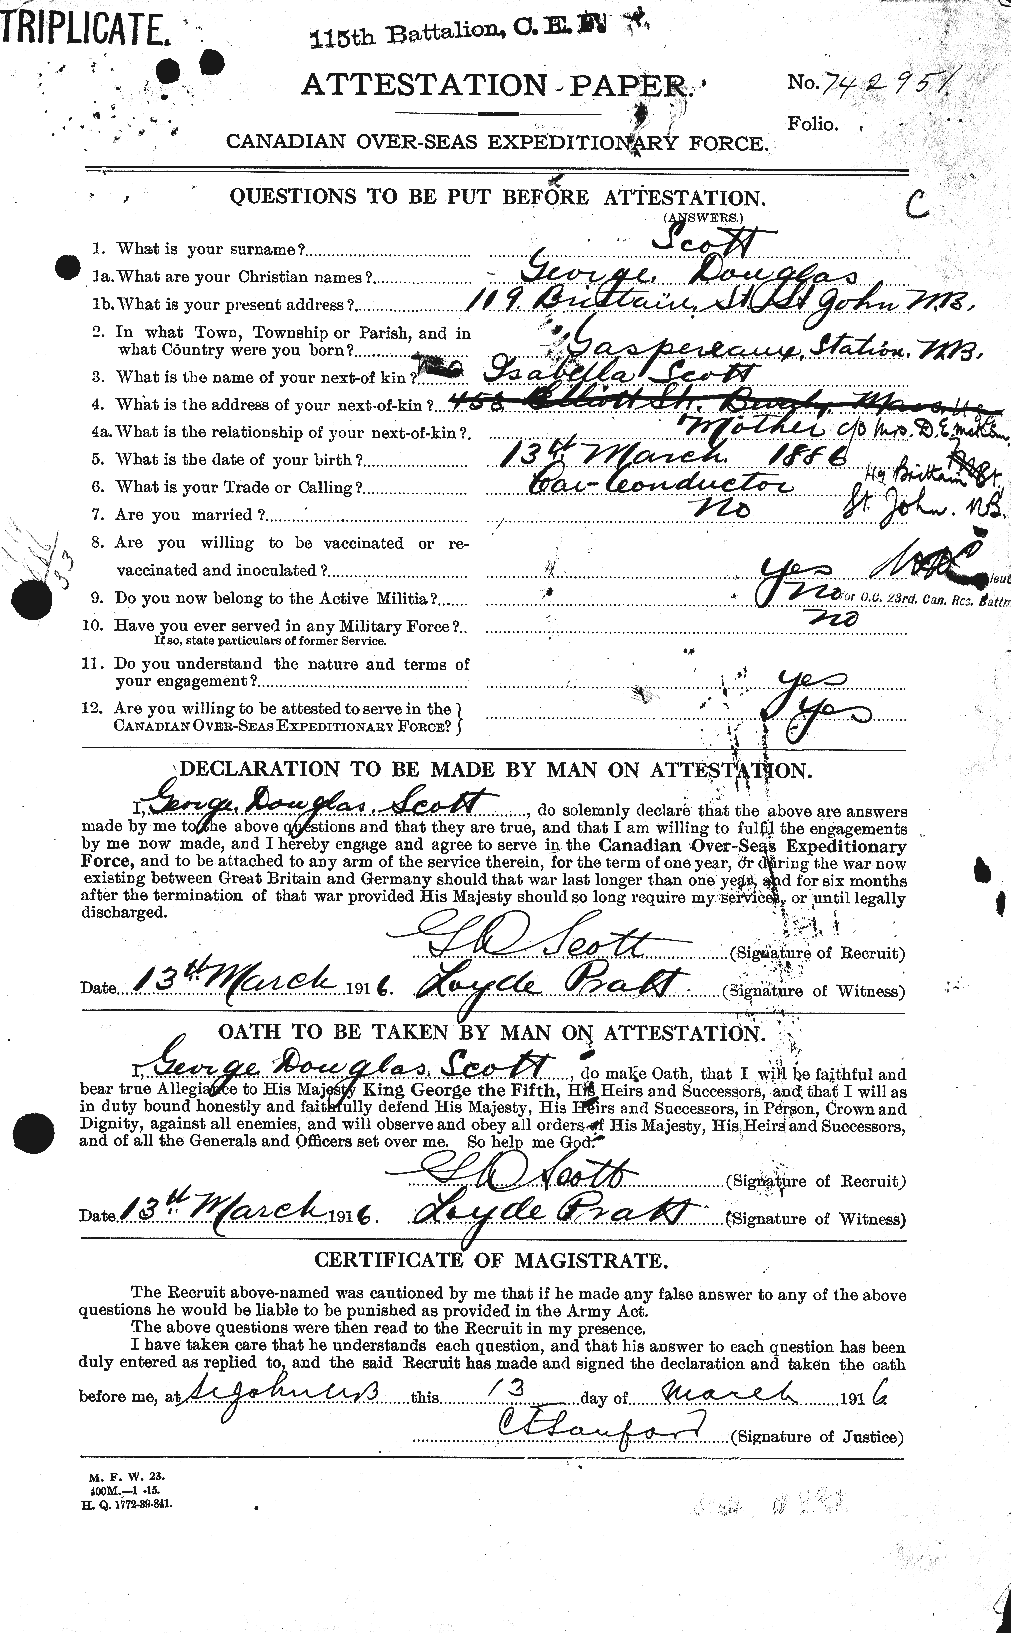 Personnel Records of the First World War - CEF 083562a